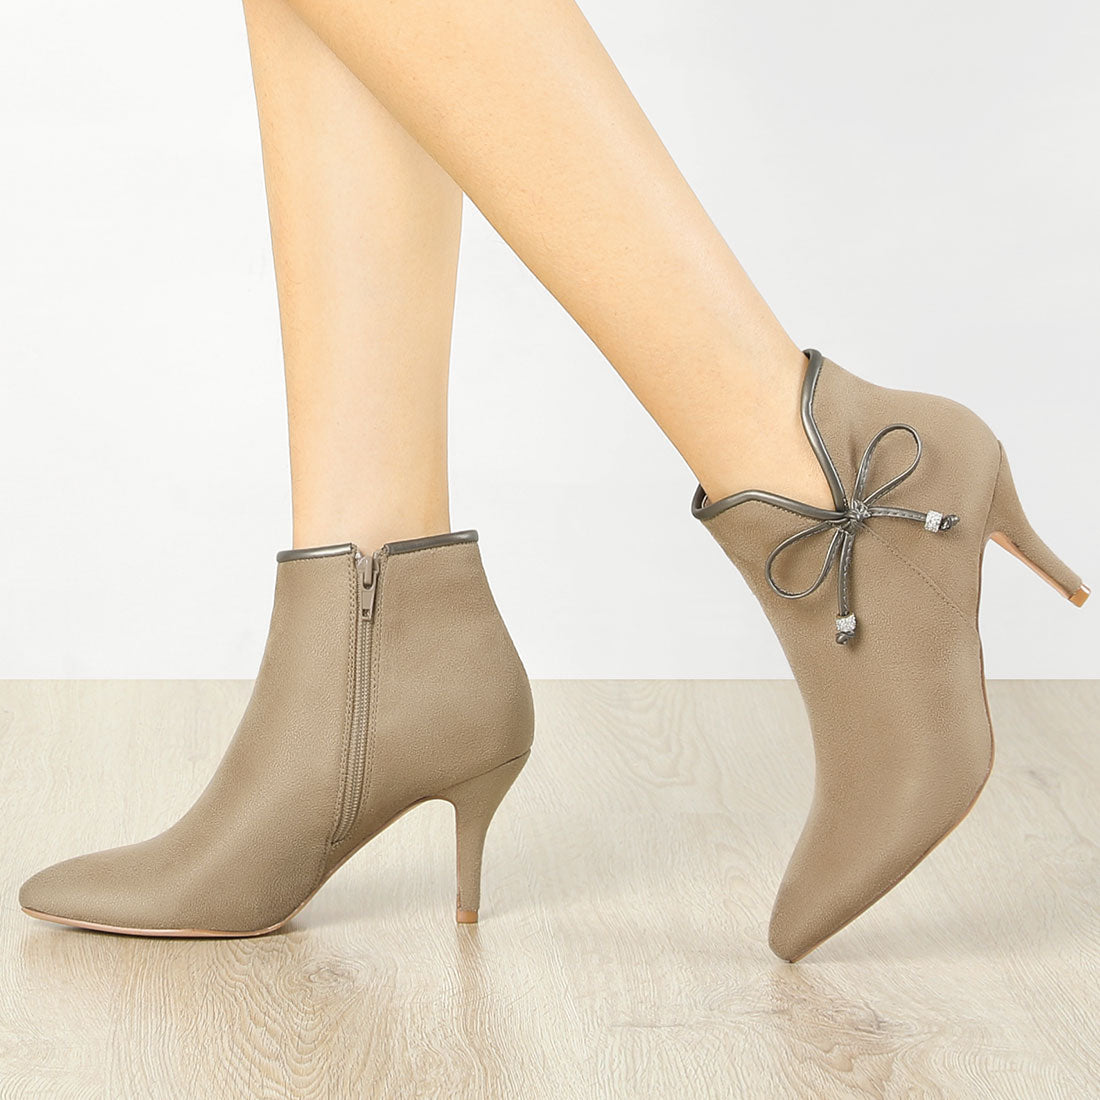 Allegra K Suede Bow Decor Pointed Toe Stiletto Heel Ankle Boots